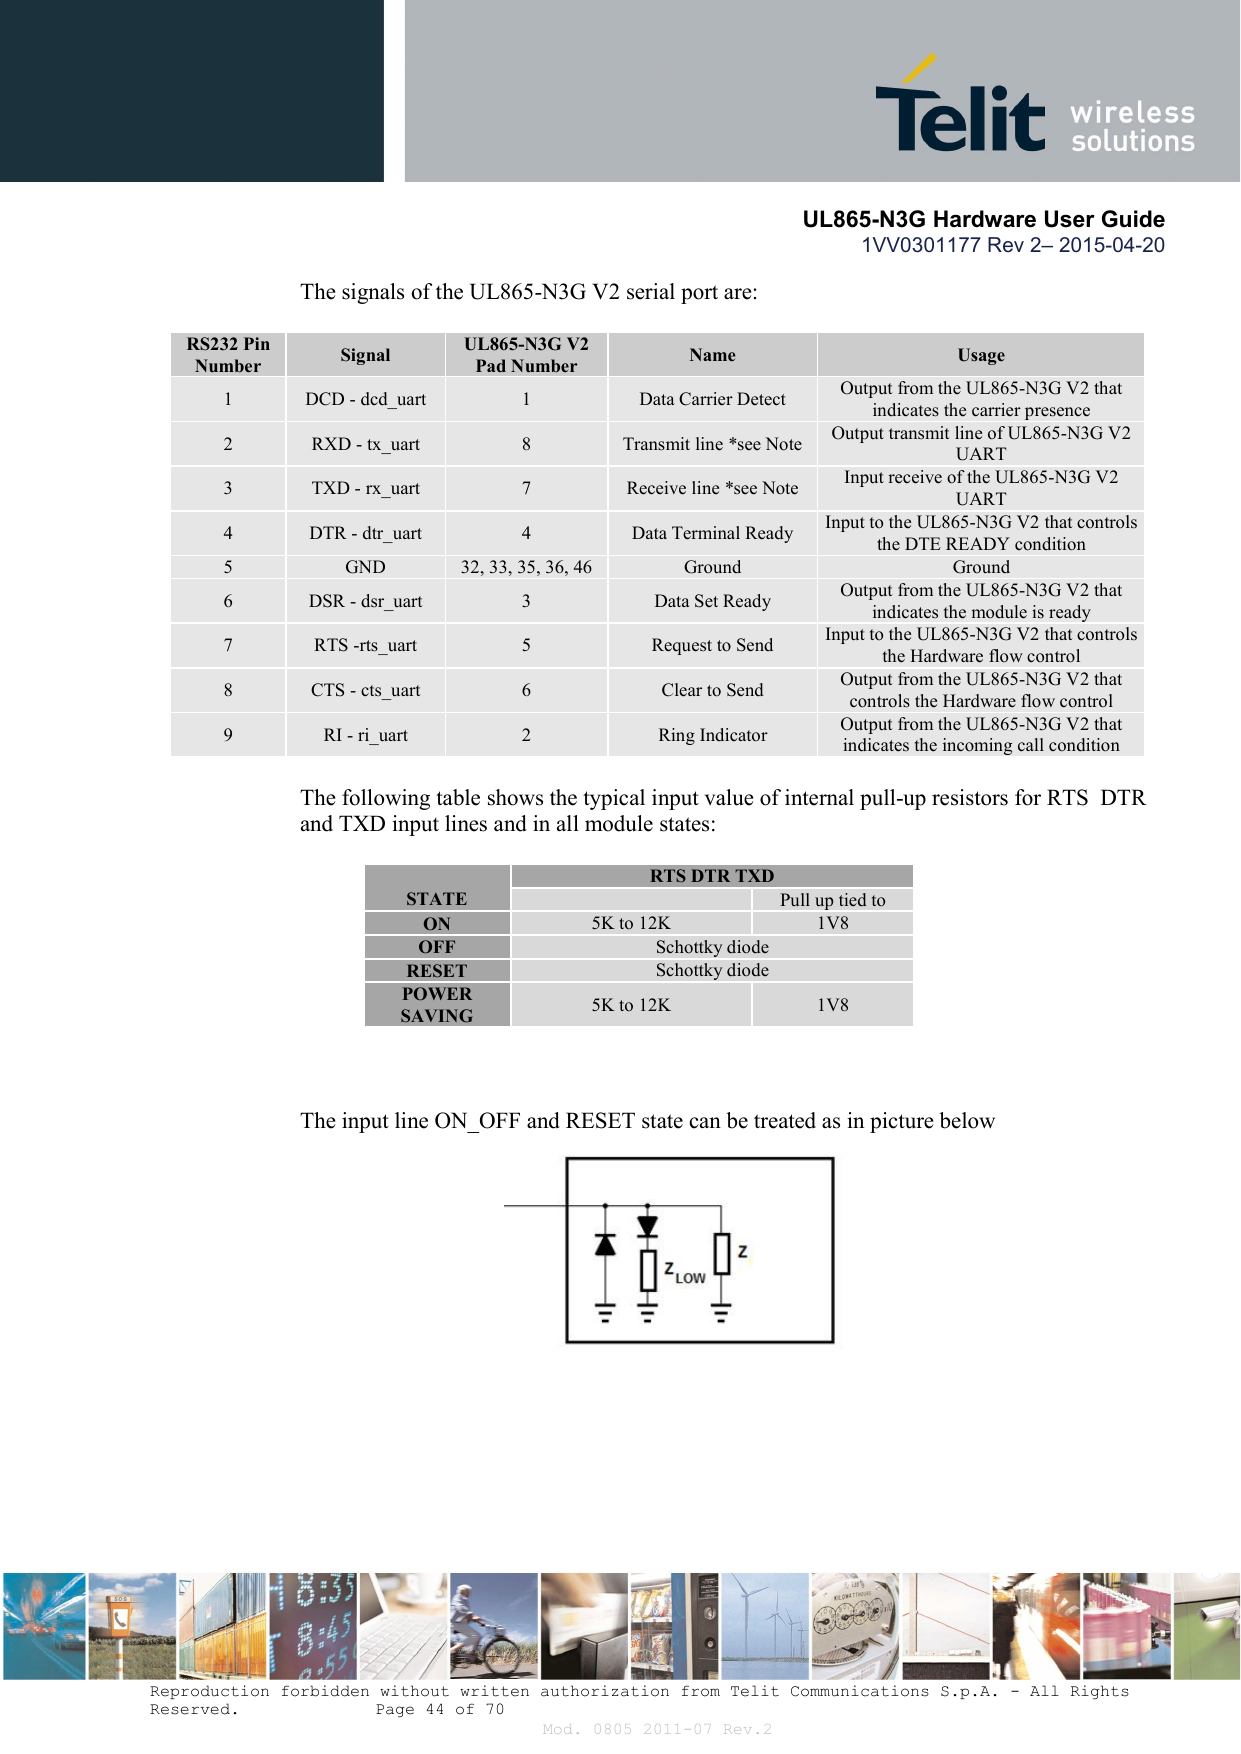       UL865-N3G Hardware User Guide 1VV0301177 Rev 2– 2015-04-20  Reproduction forbidden without written authorization from Telit Communications S.p.A. - All Rights Reserved.    Page 44 of 70 Mod. 0805 2011-07 Rev.2 The signals of the UL865-N3G V2 serial port are:  RS232 Pin Number  Signal  UL865-N3G V2 Pad Number  Name  Usage 1  DCD - dcd_uart  1  Data Carrier Detect  Output from the UL865-N3G V2 that indicates the carrier presence 2  RXD - tx_uart  8  Transmit line *see Note  Output transmit line of UL865-N3G V2 UART 3  TXD - rx_uart  7  Receive line *see Note  Input receive of the UL865-N3G V2 UART 4  DTR - dtr_uart  4  Data Terminal Ready  Input to the UL865-N3G V2 that controls the DTE READY condition 5  GND  32, 33, 35, 36, 46  Ground  Ground 6  DSR - dsr_uart  3  Data Set Ready  Output from the UL865-N3G V2 that indicates the module is ready 7  RTS -rts_uart  5  Request to Send  Input to the UL865-N3G V2 that controls the Hardware flow control 8  CTS - cts_uart  6  Clear to Send  Output from the UL865-N3G V2 that controls the Hardware flow control 9  RI - ri_uart  2  Ring Indicator  Output from the UL865-N3G V2 that indicates the incoming call condition  The following table shows the typical input value of internal pull-up resistors for RTS  DTR and TXD input lines and in all module states:   STATE RTS DTR TXD   Pull up tied to ON  5K to 12K  1V8 OFF  Schottky diode RESET  Schottky diode POWER SAVING  5K to 12K  1V8    The input line ON_OFF and RESET state can be treated as in picture below                